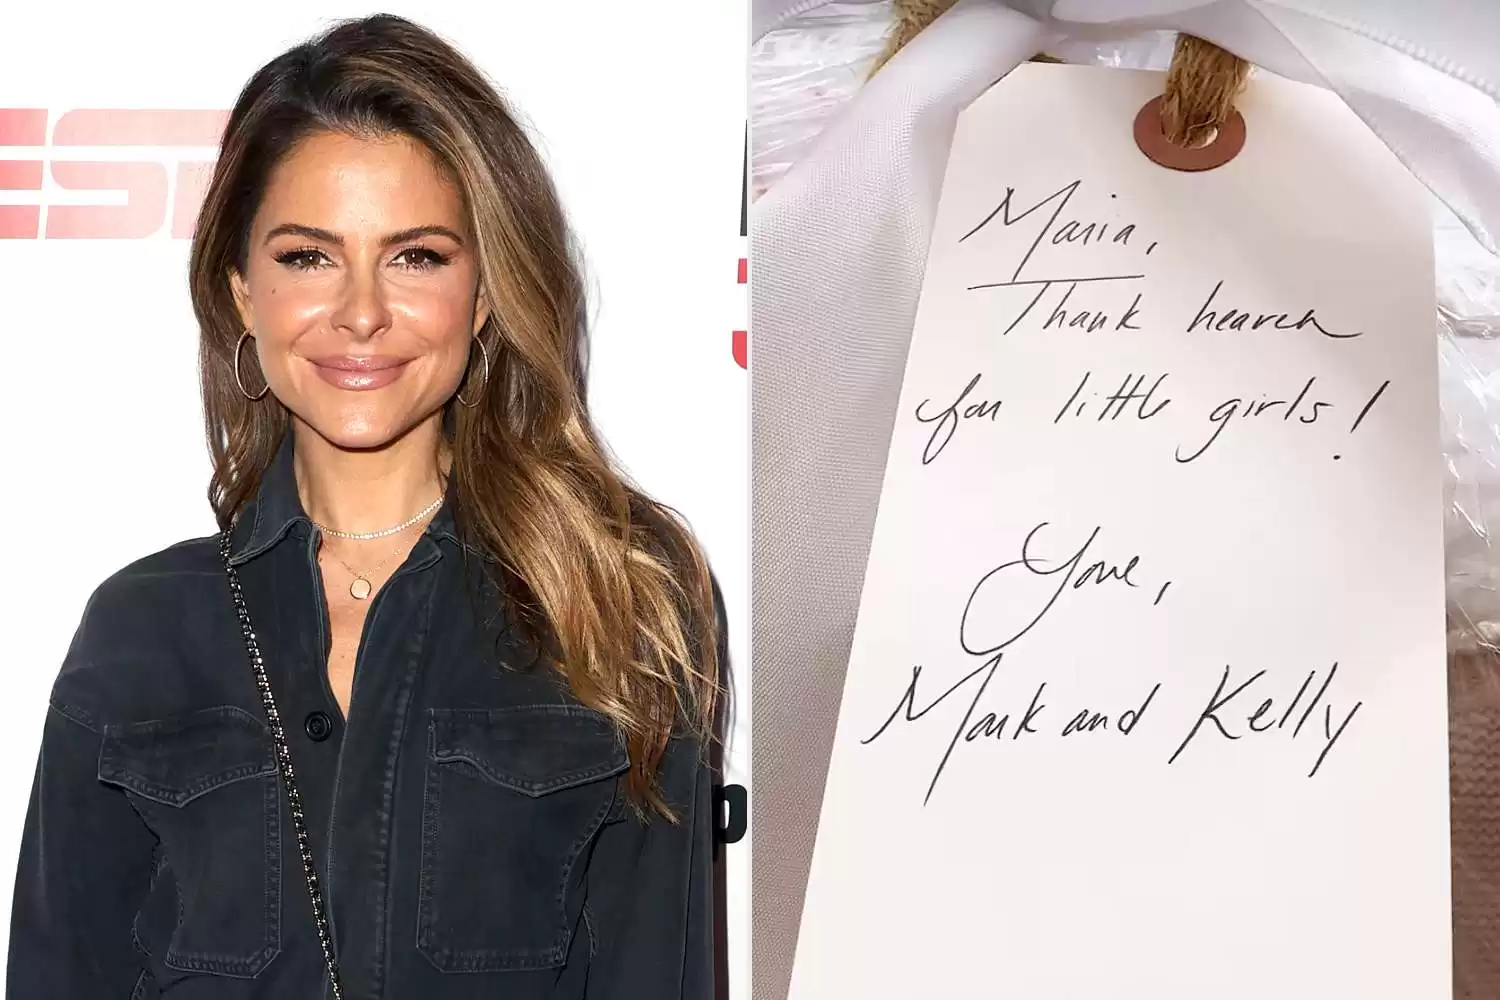 Maria Menounos Reveals the Thoughtful Baby Present She Got from Kelly Ripa and Mark Consuelos